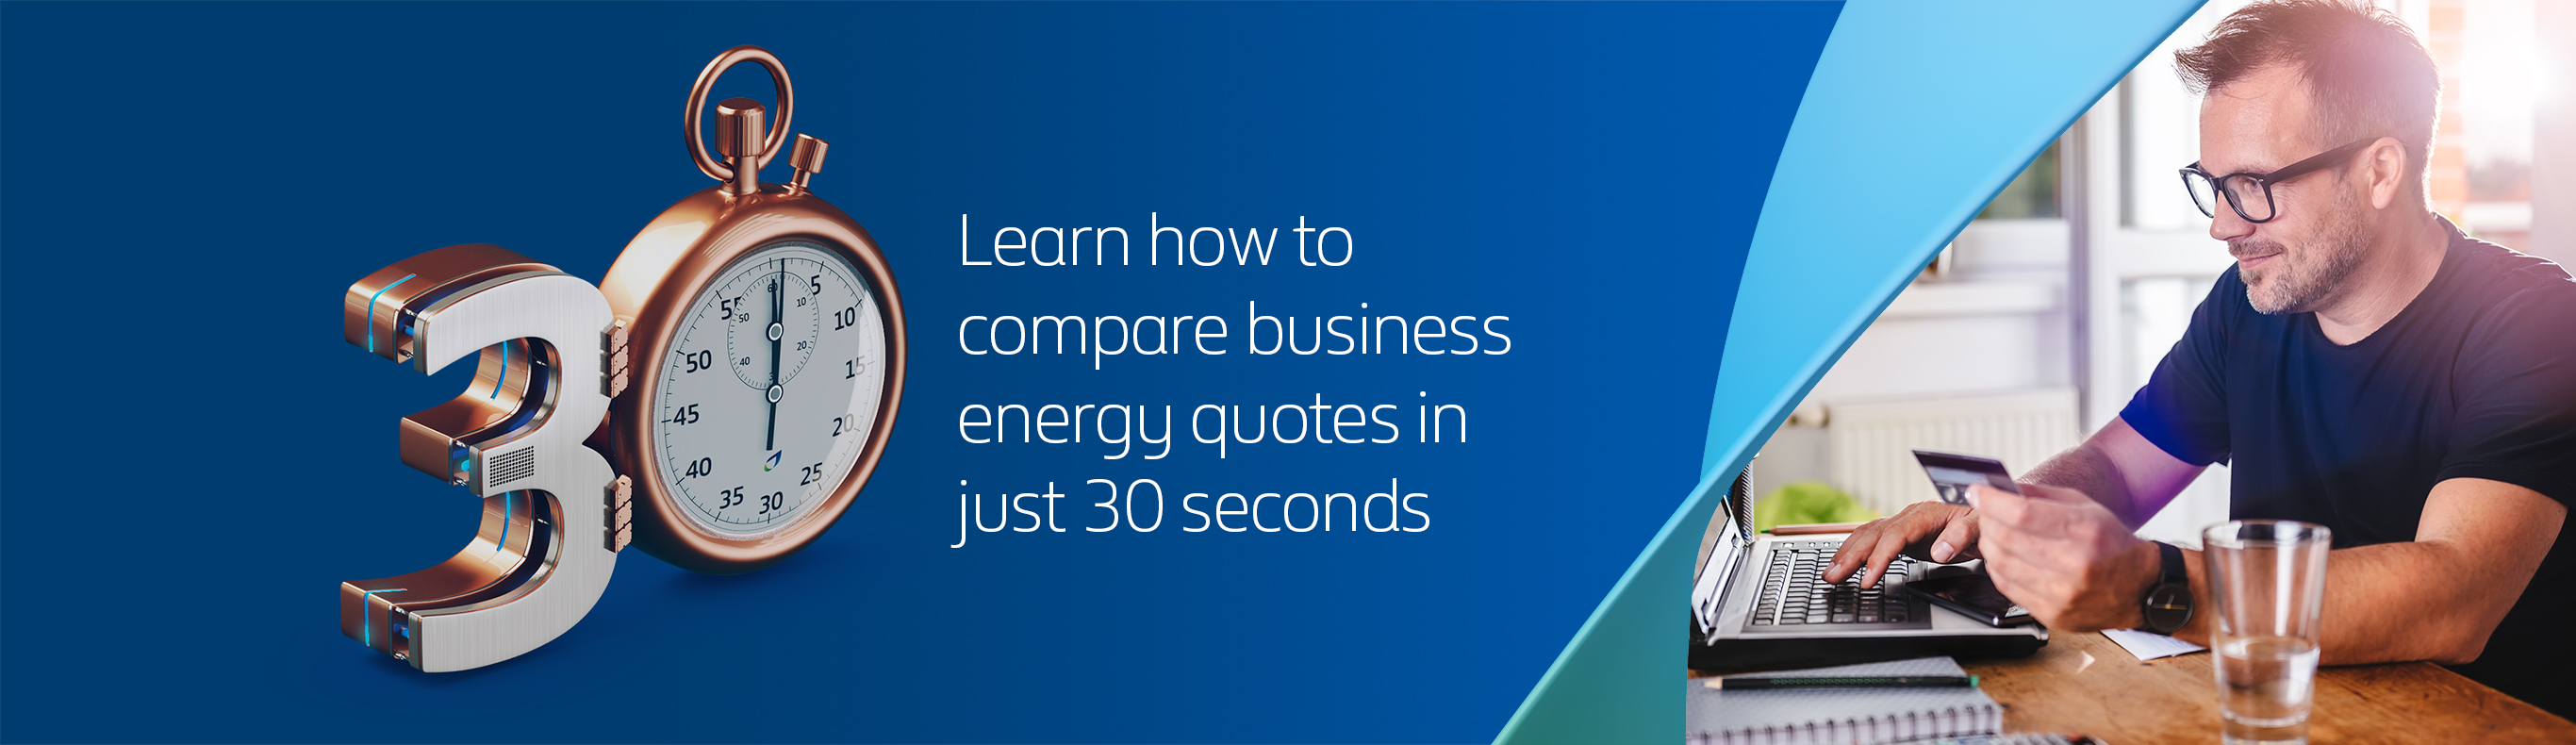 Learn how to compare business energy quotes in just 30 seconds